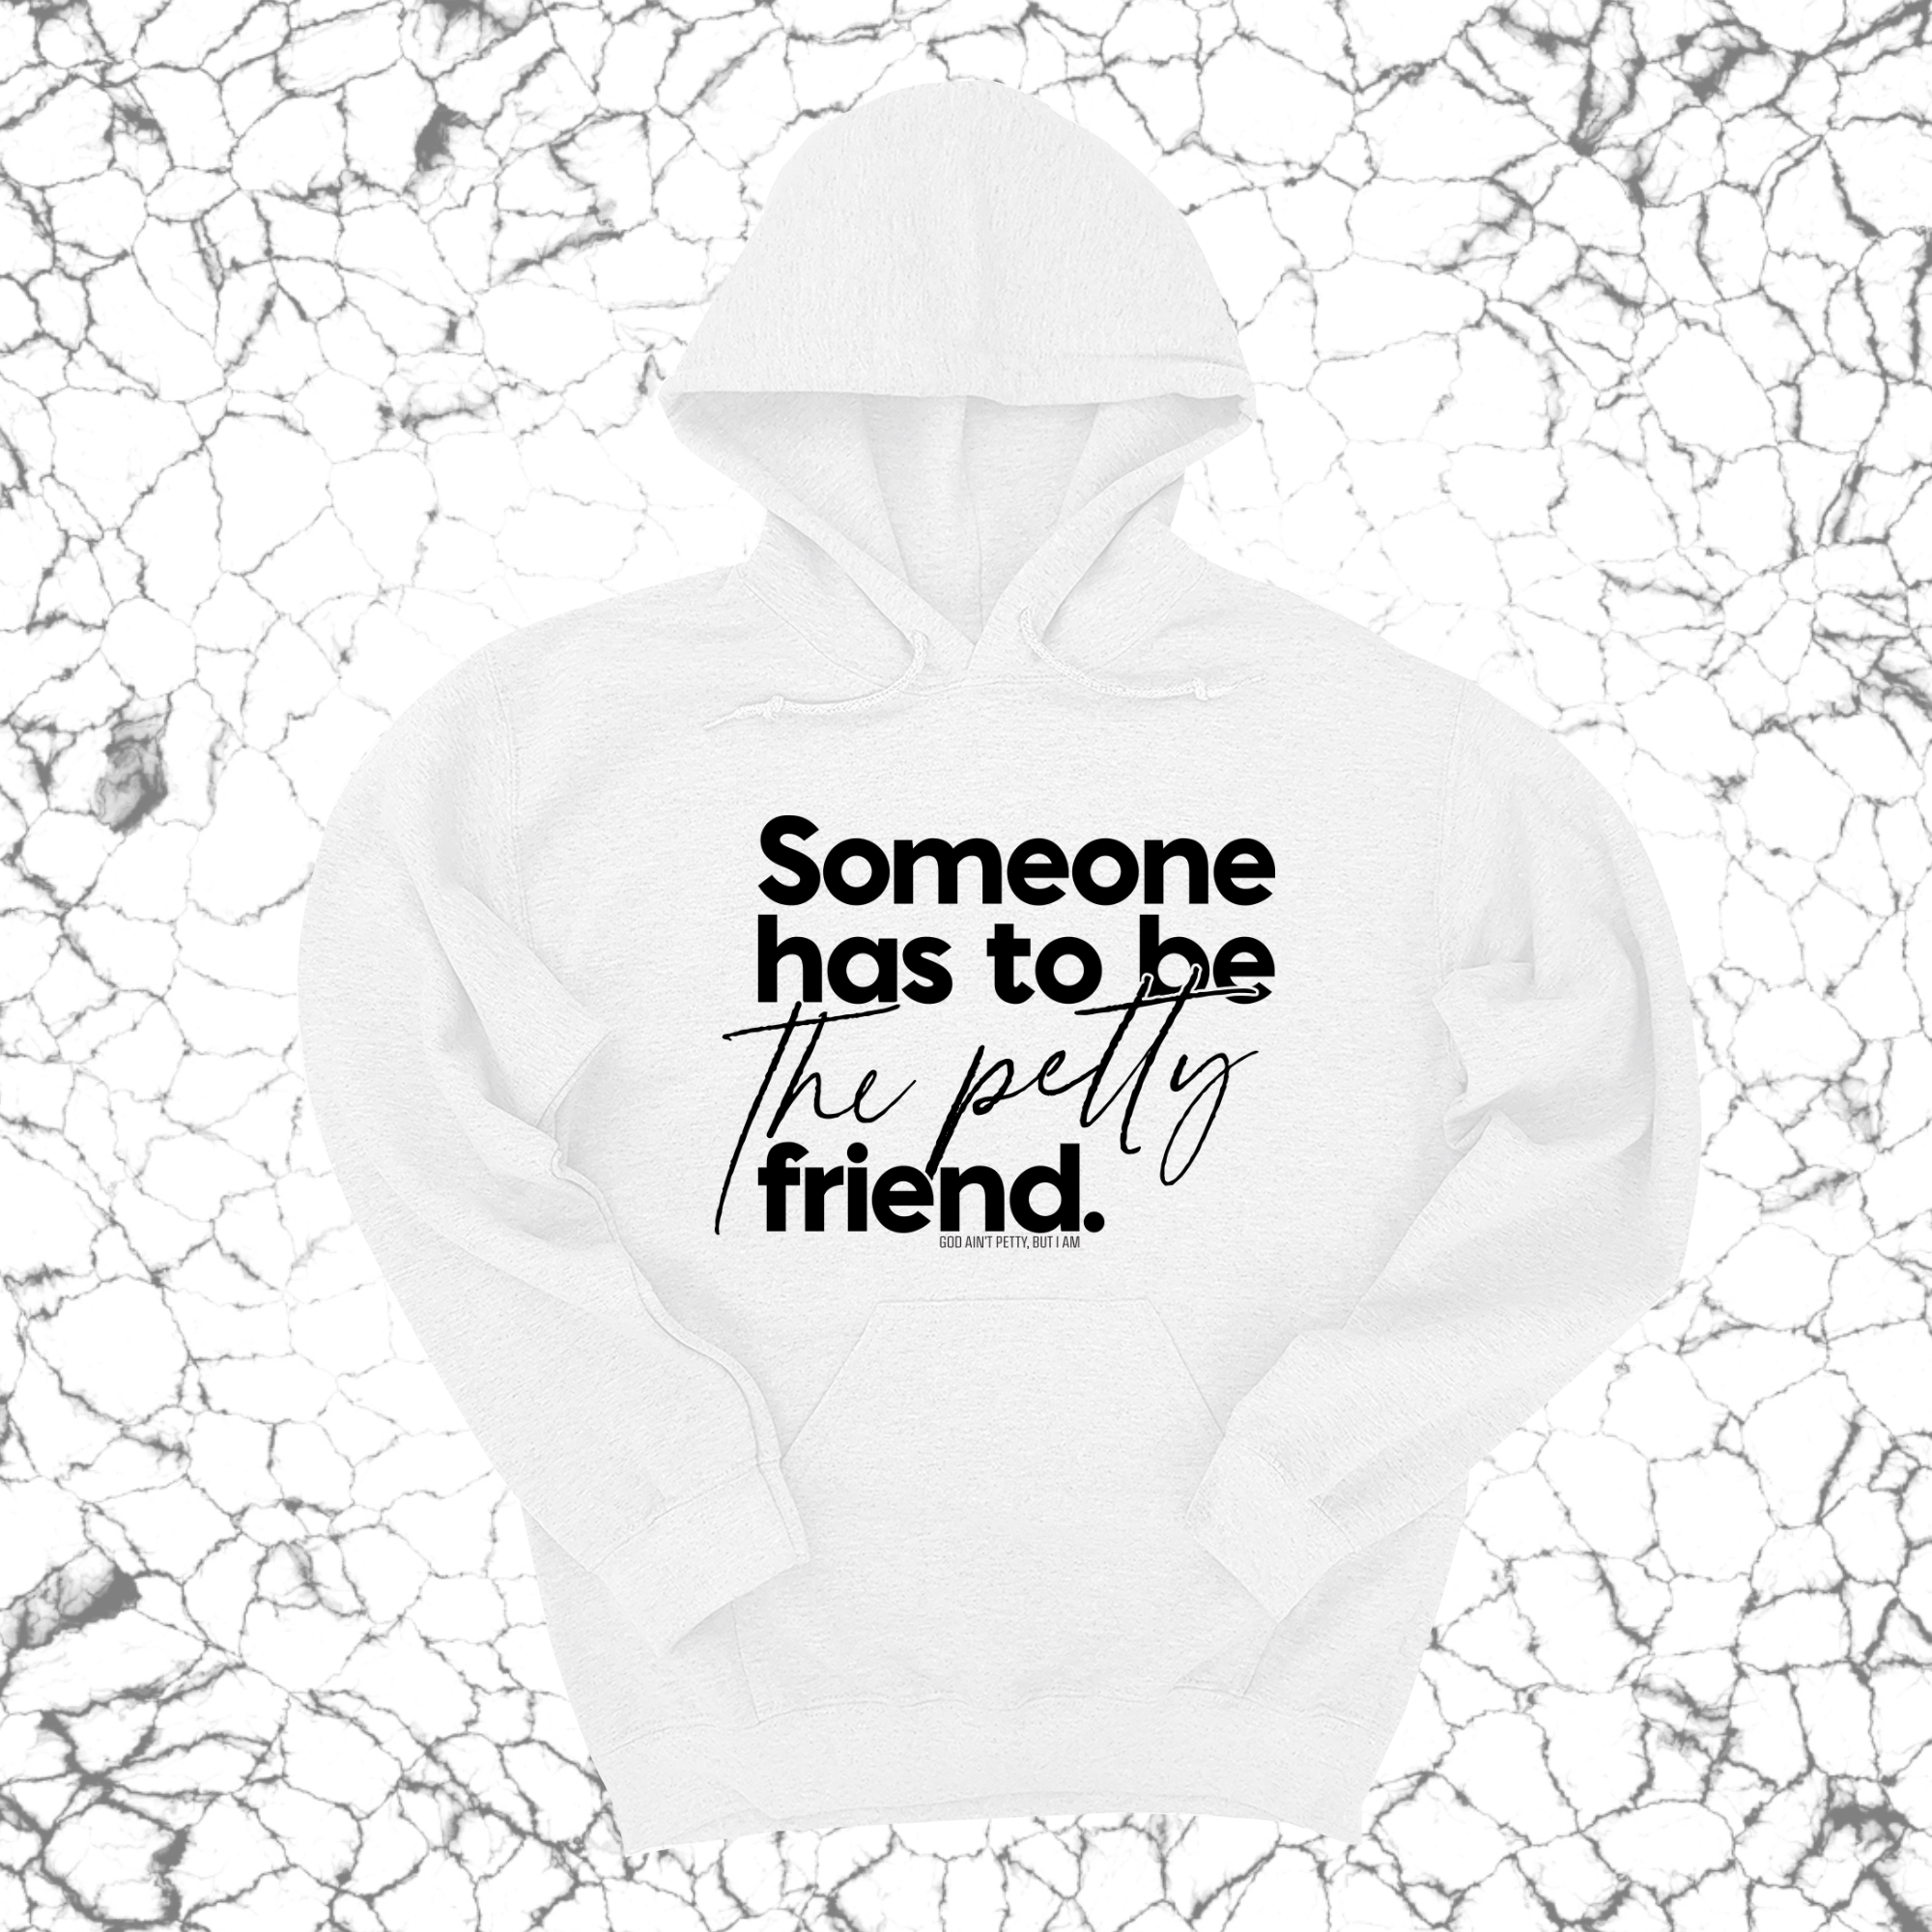 Someone has to be the Petty Friend Unisex Hoodie-Hoodie-The Original God Ain't Petty But I Am